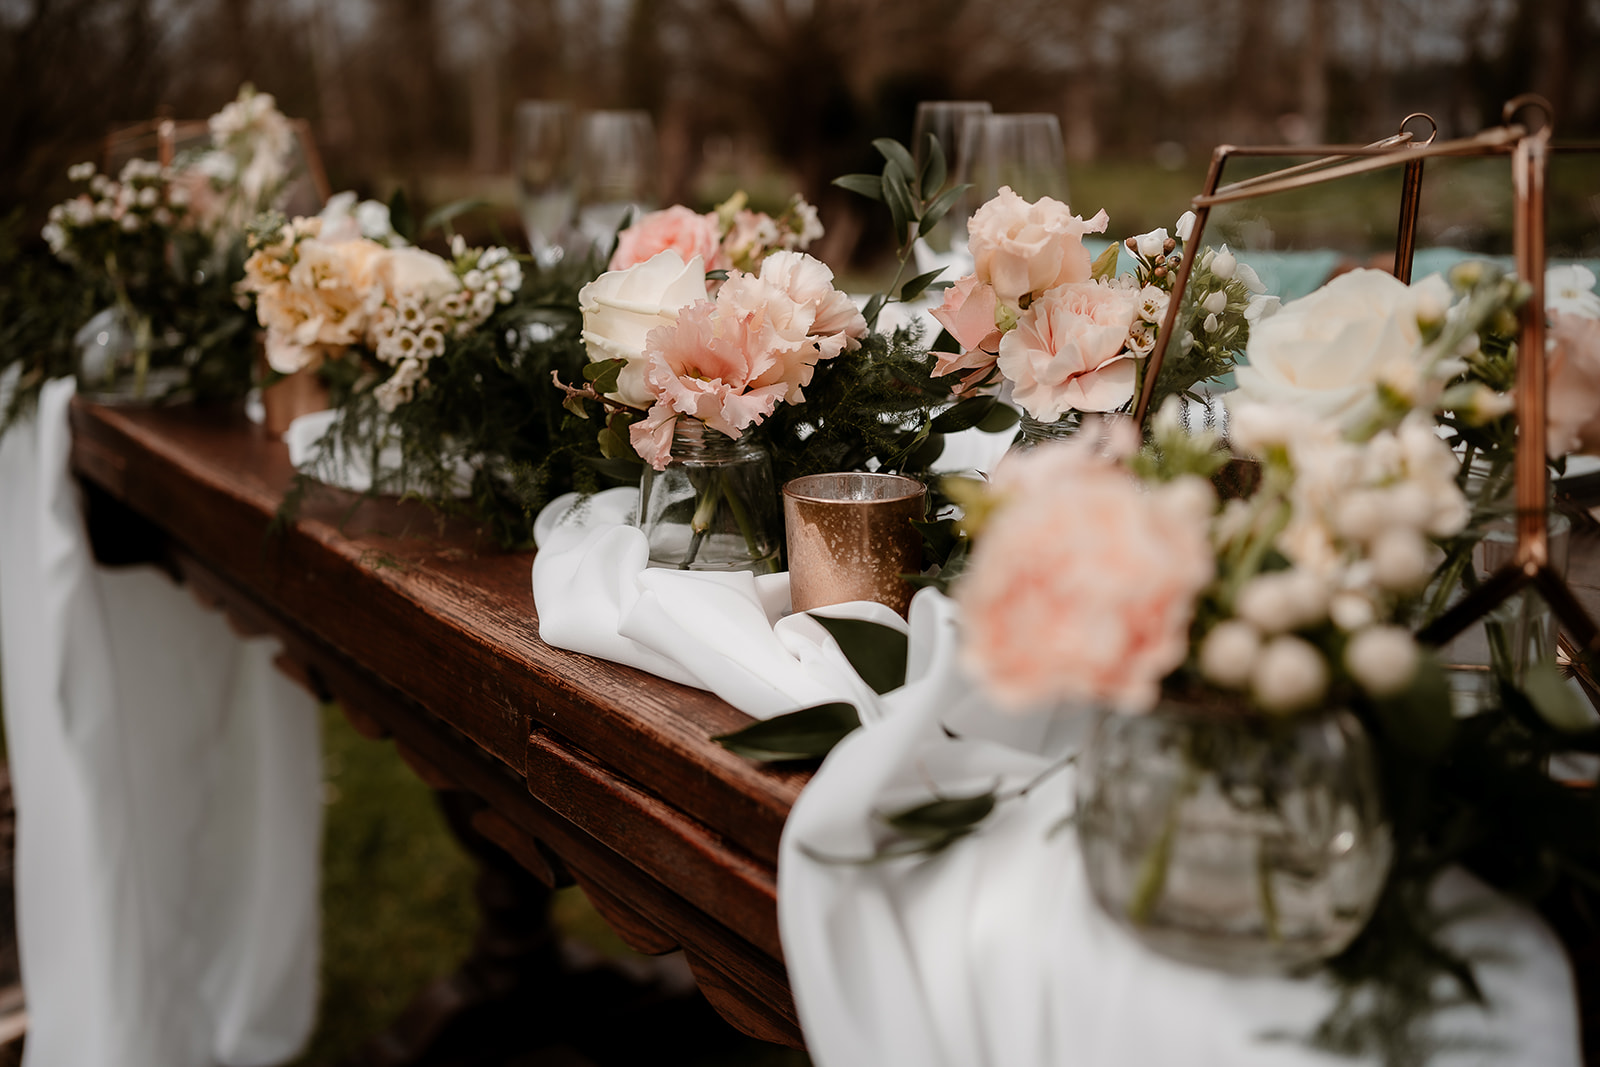 Close up of the peachy toned flowers on the sweetheart table set up on the grounds of Mapledurham House wedding venue